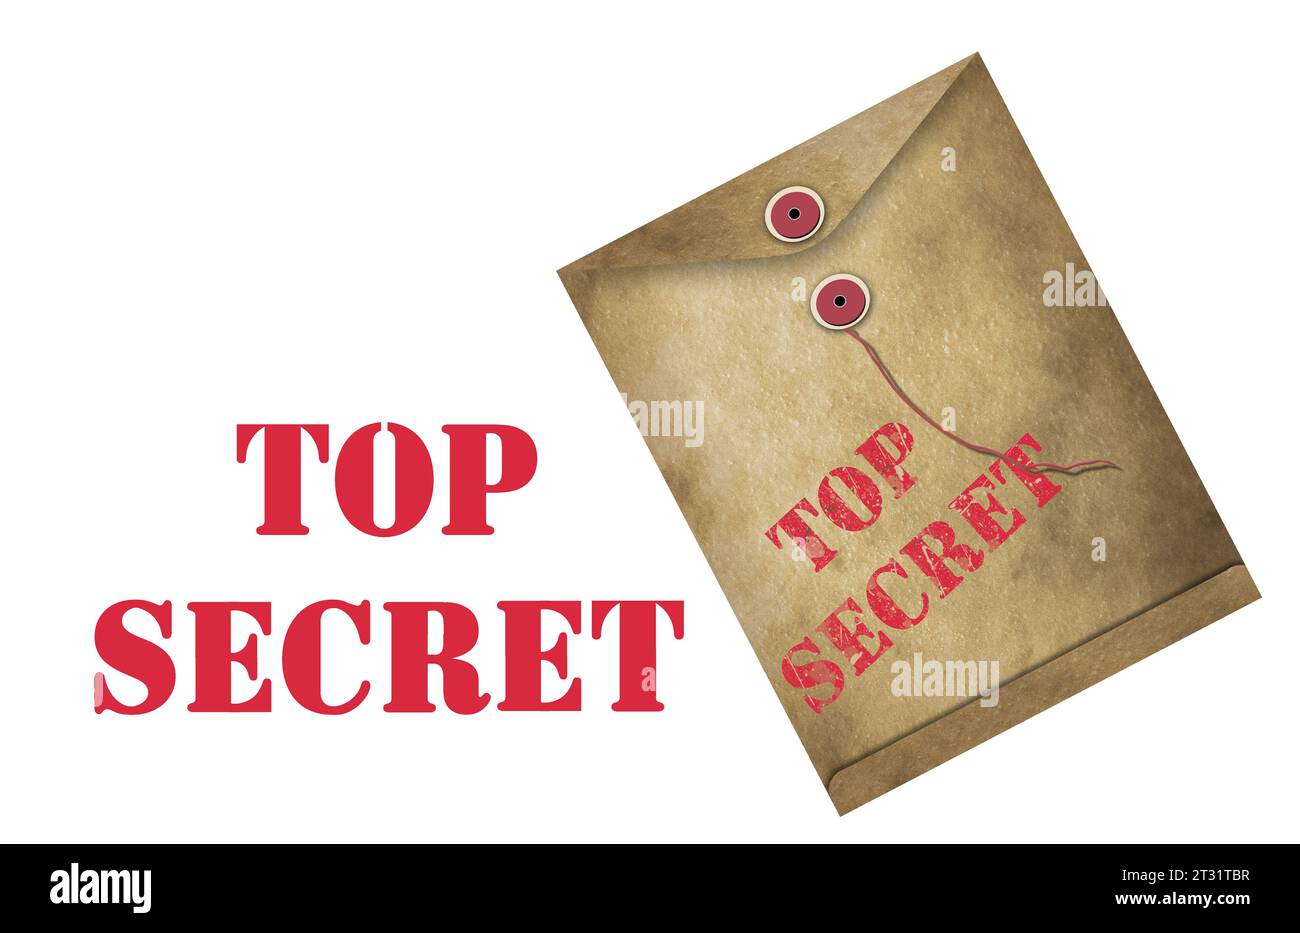 Top Secret documents are concealed in a dirty grungy envelope and the top secret words are isolated in this 3-d illustration. Stock Photo